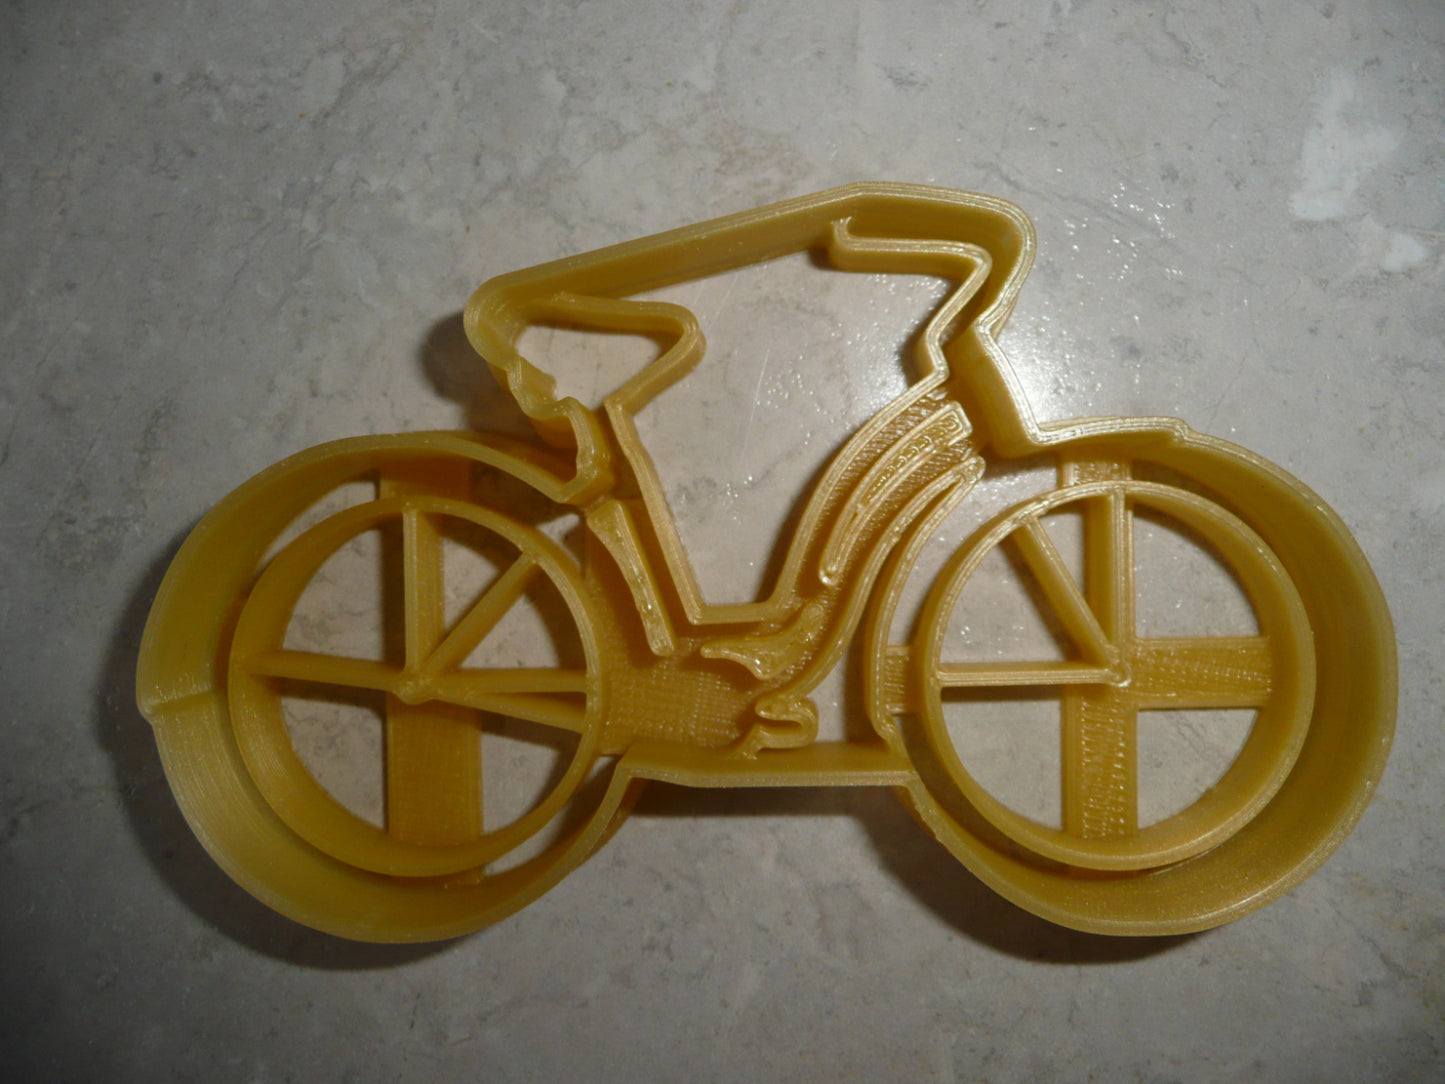 Vintage Retro Cruiser Style Bike Bicycle Cookie Cutter Made In USA PR4916